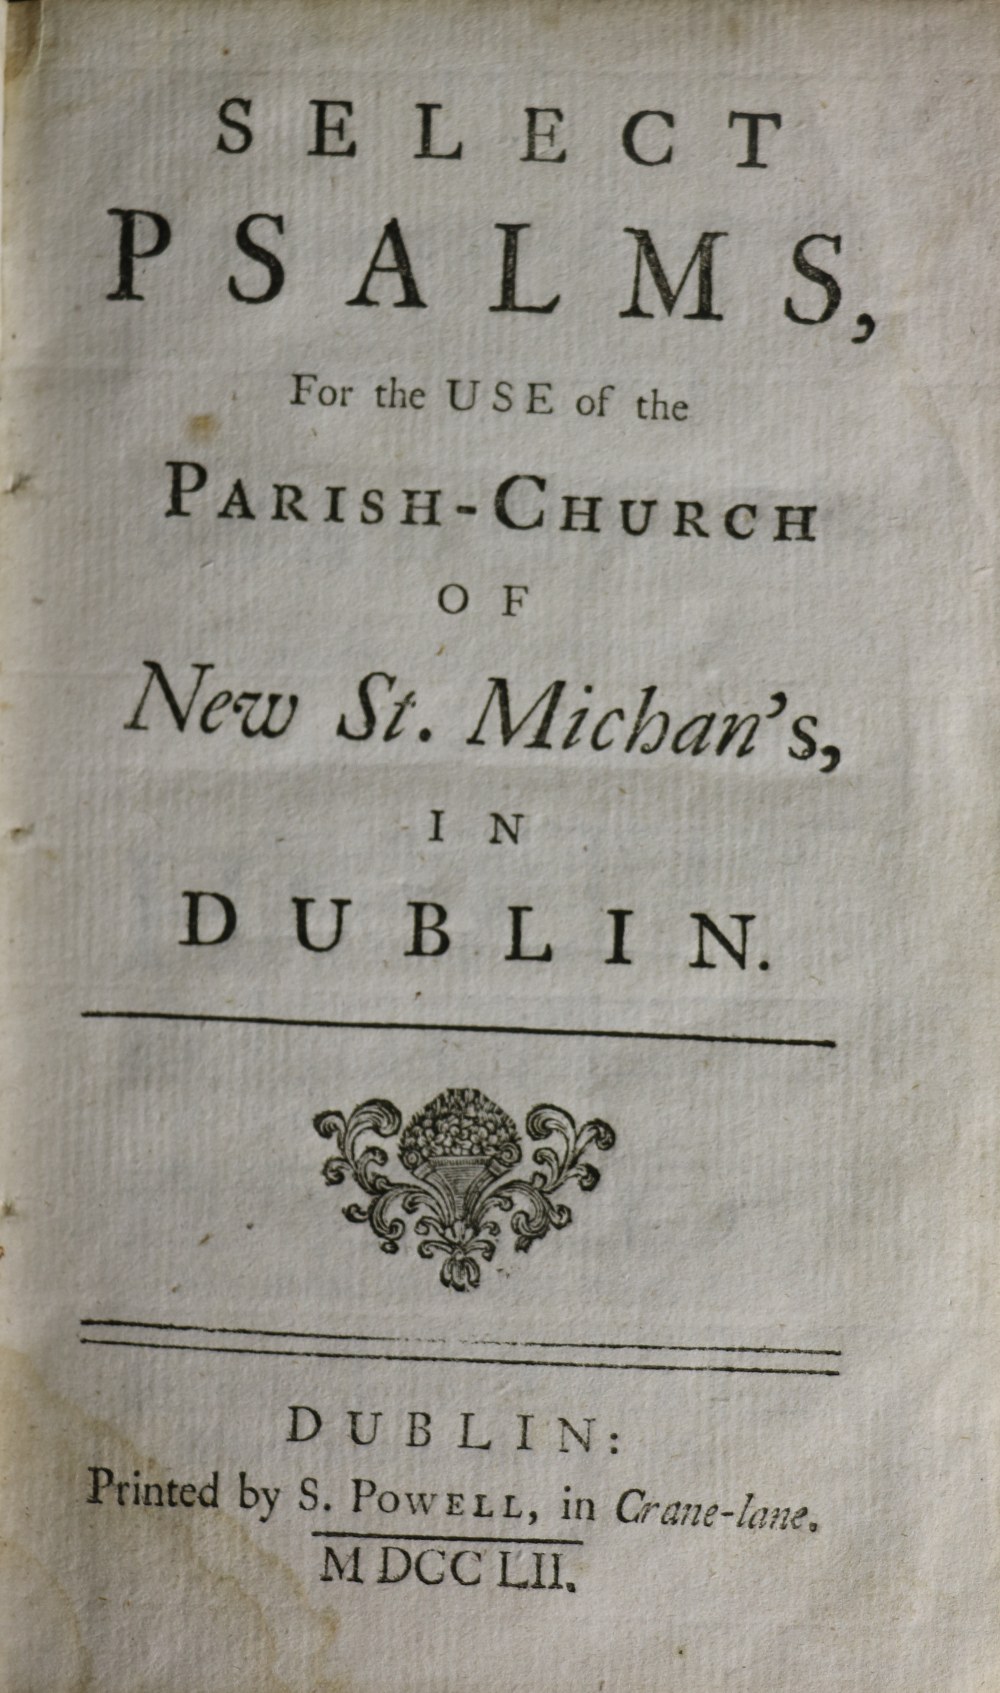 St. Michans: Select Psalms for the Use of the Parish Church of New St. Michan's in Dublin, 12mo D.